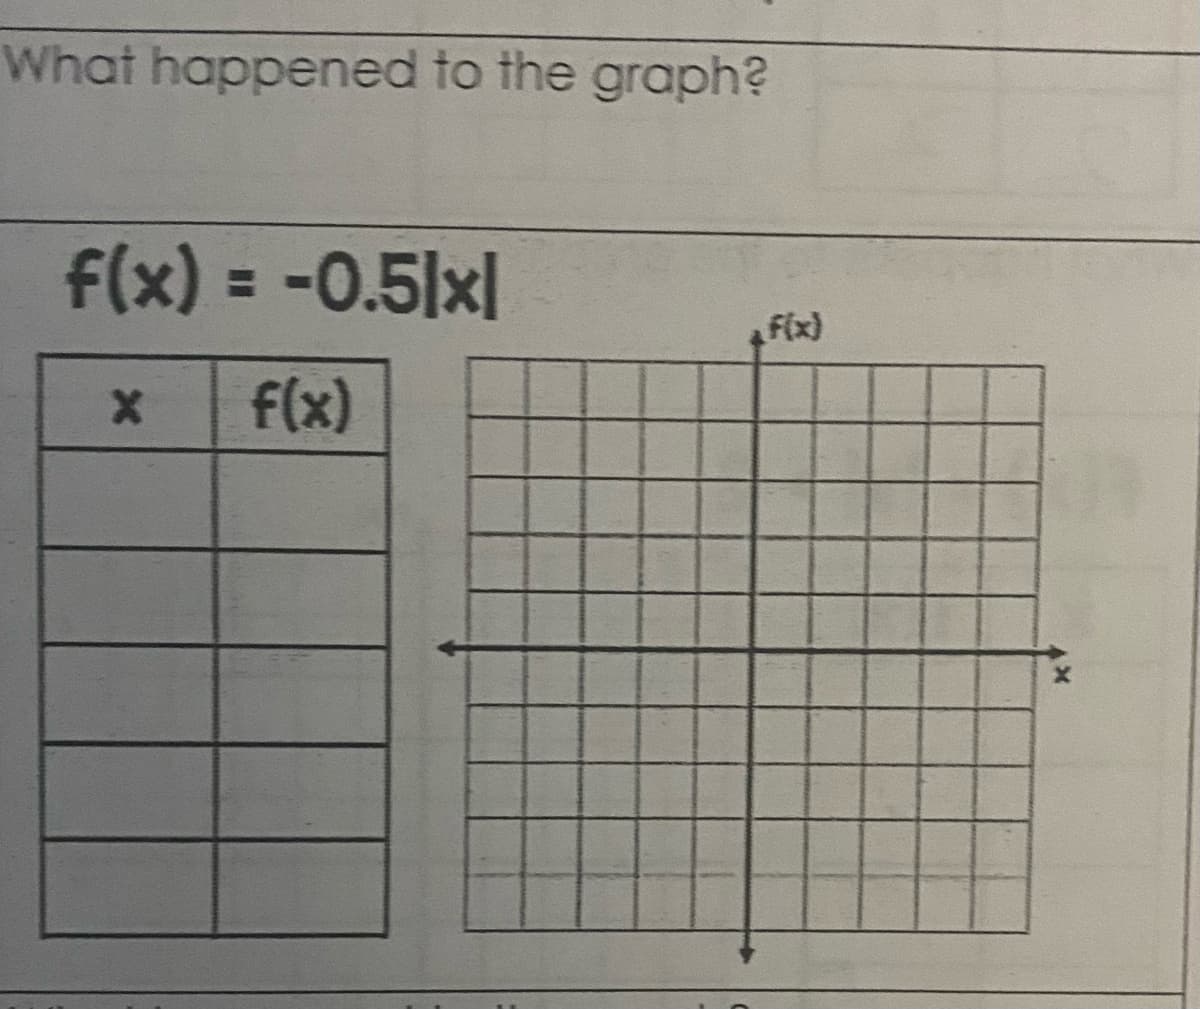 What happened to the graph?
f(x) = -0.5|x|
Fix)
f(x)
